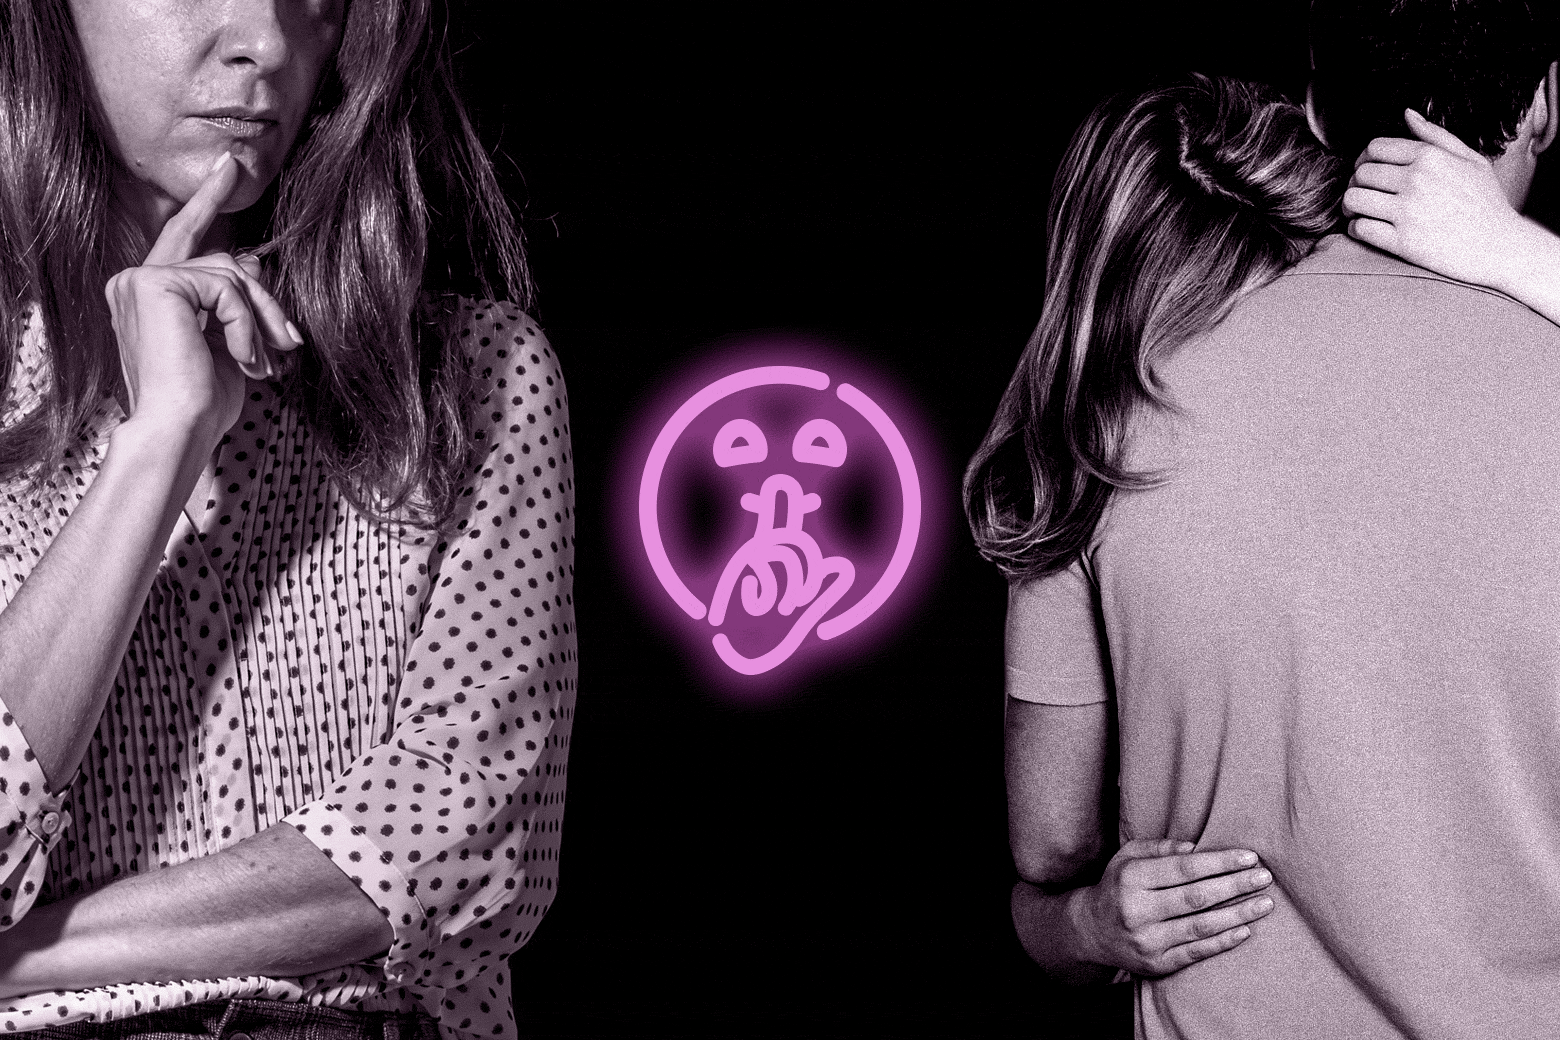 A woman looks at a couple, eyeing them suspiciously. A neon "shh" emoji appears between them.